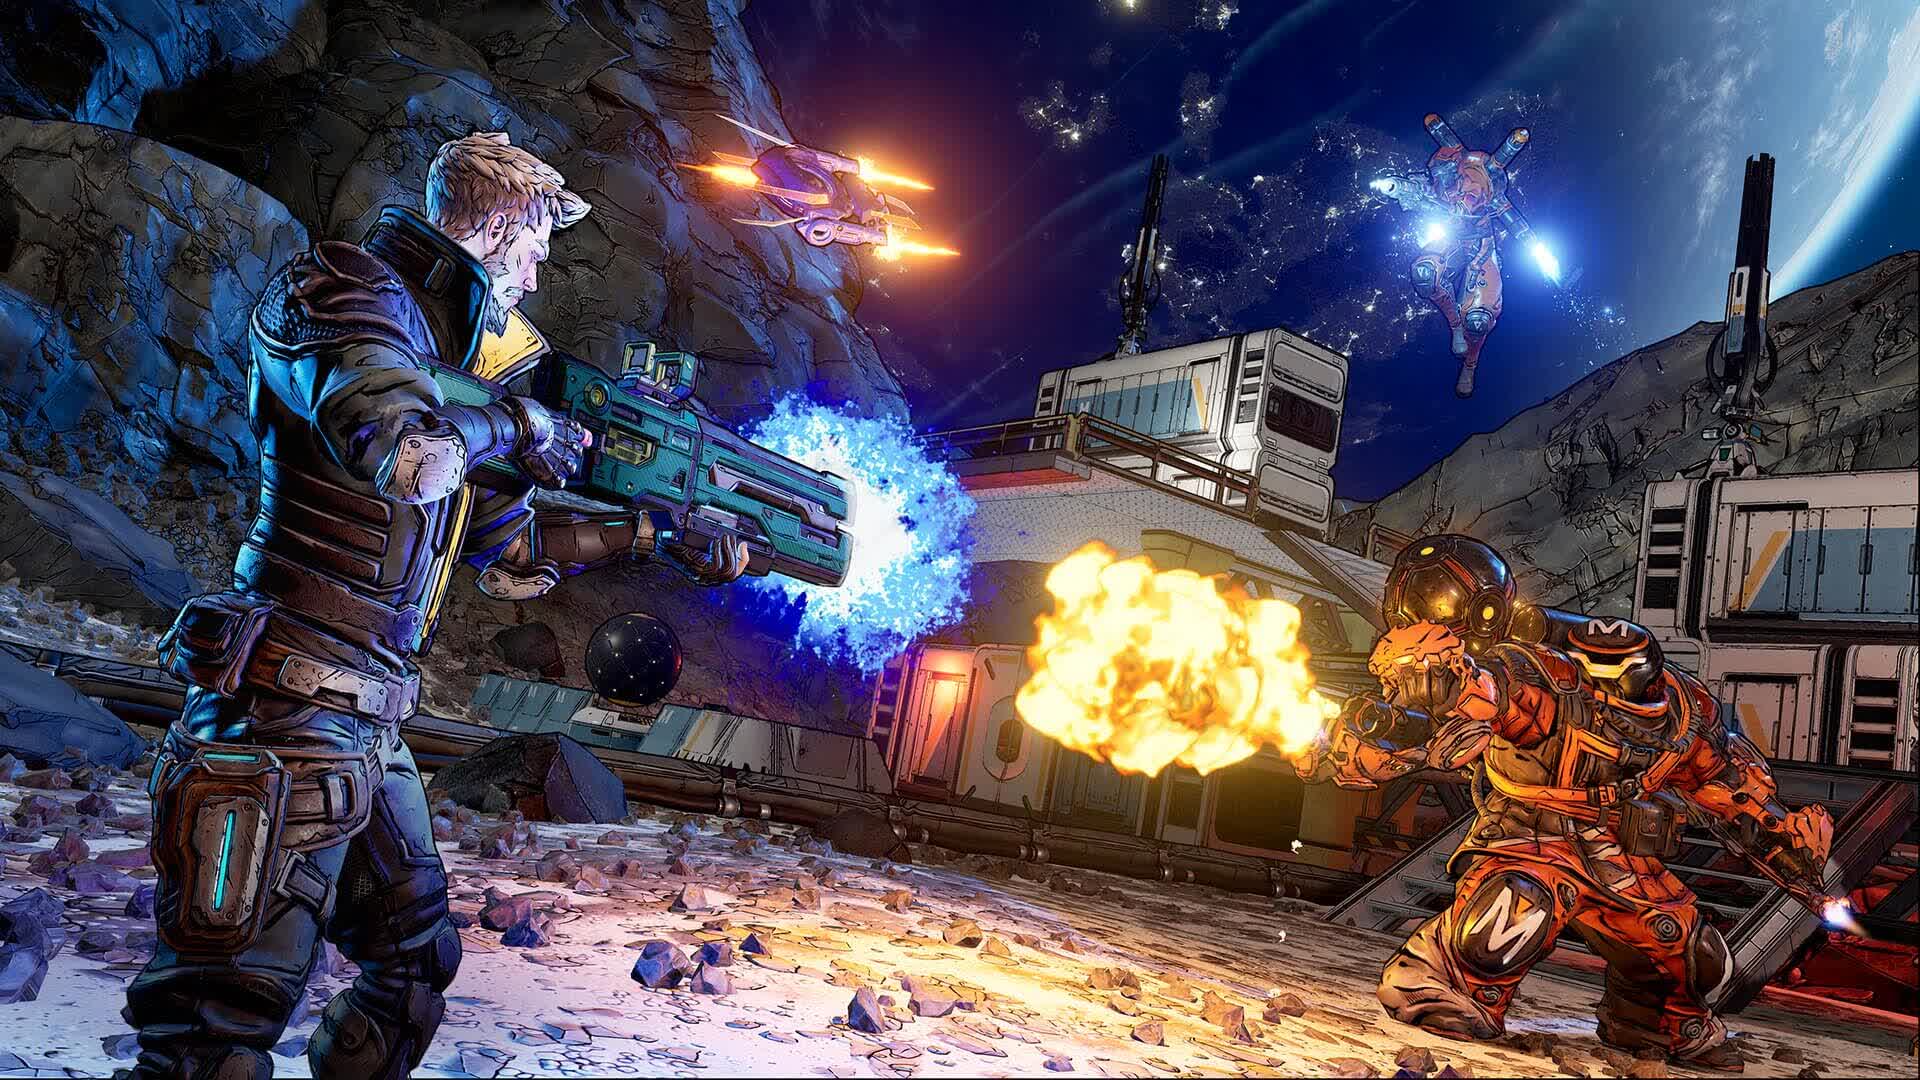 Borderlands 3 is coming to next-gen gaming consoles